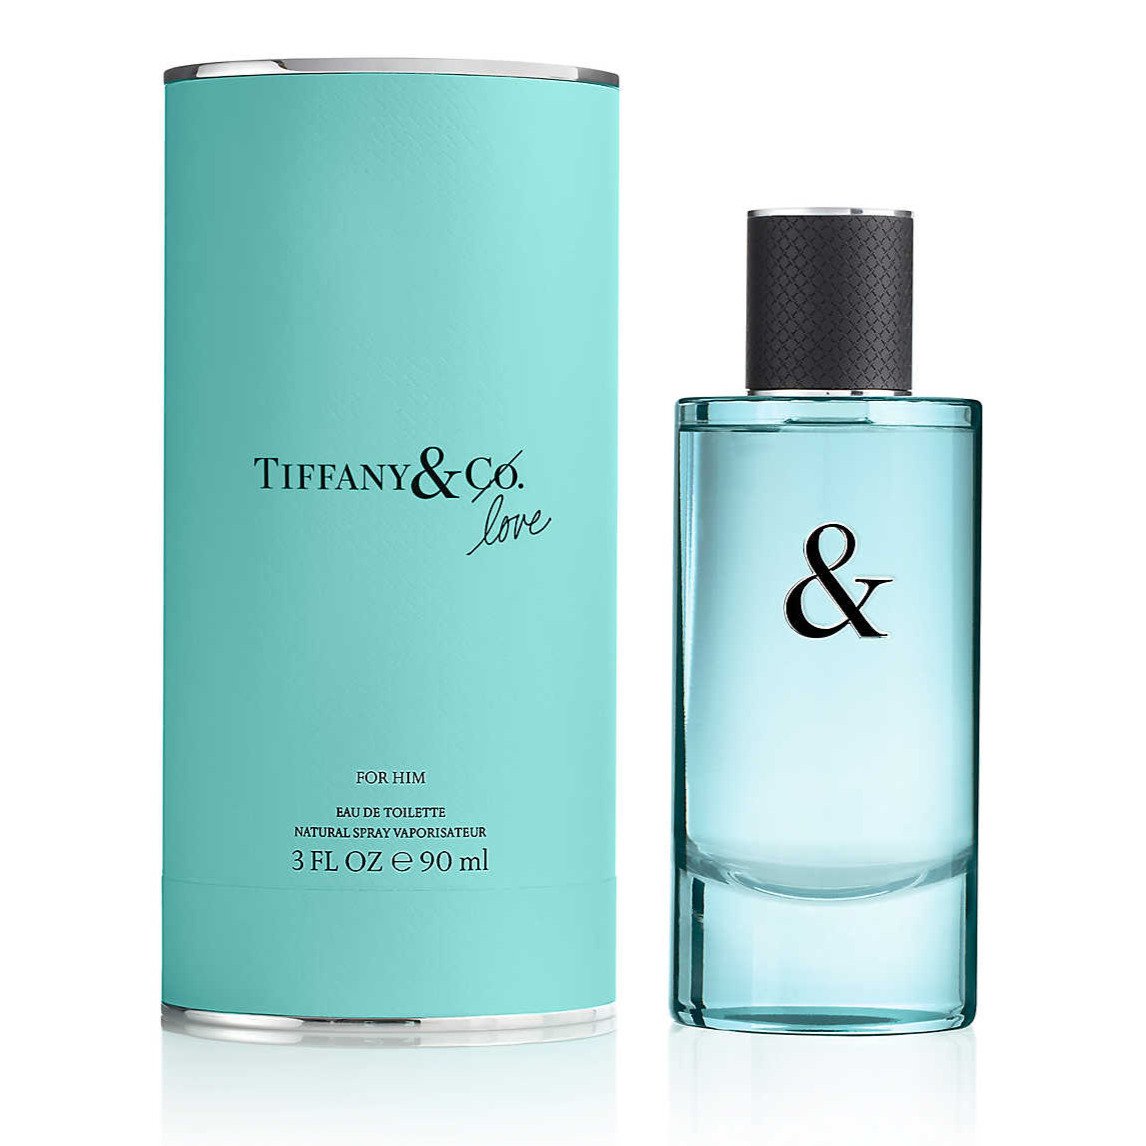 Tiffany & Co. EDT For Him 90ml